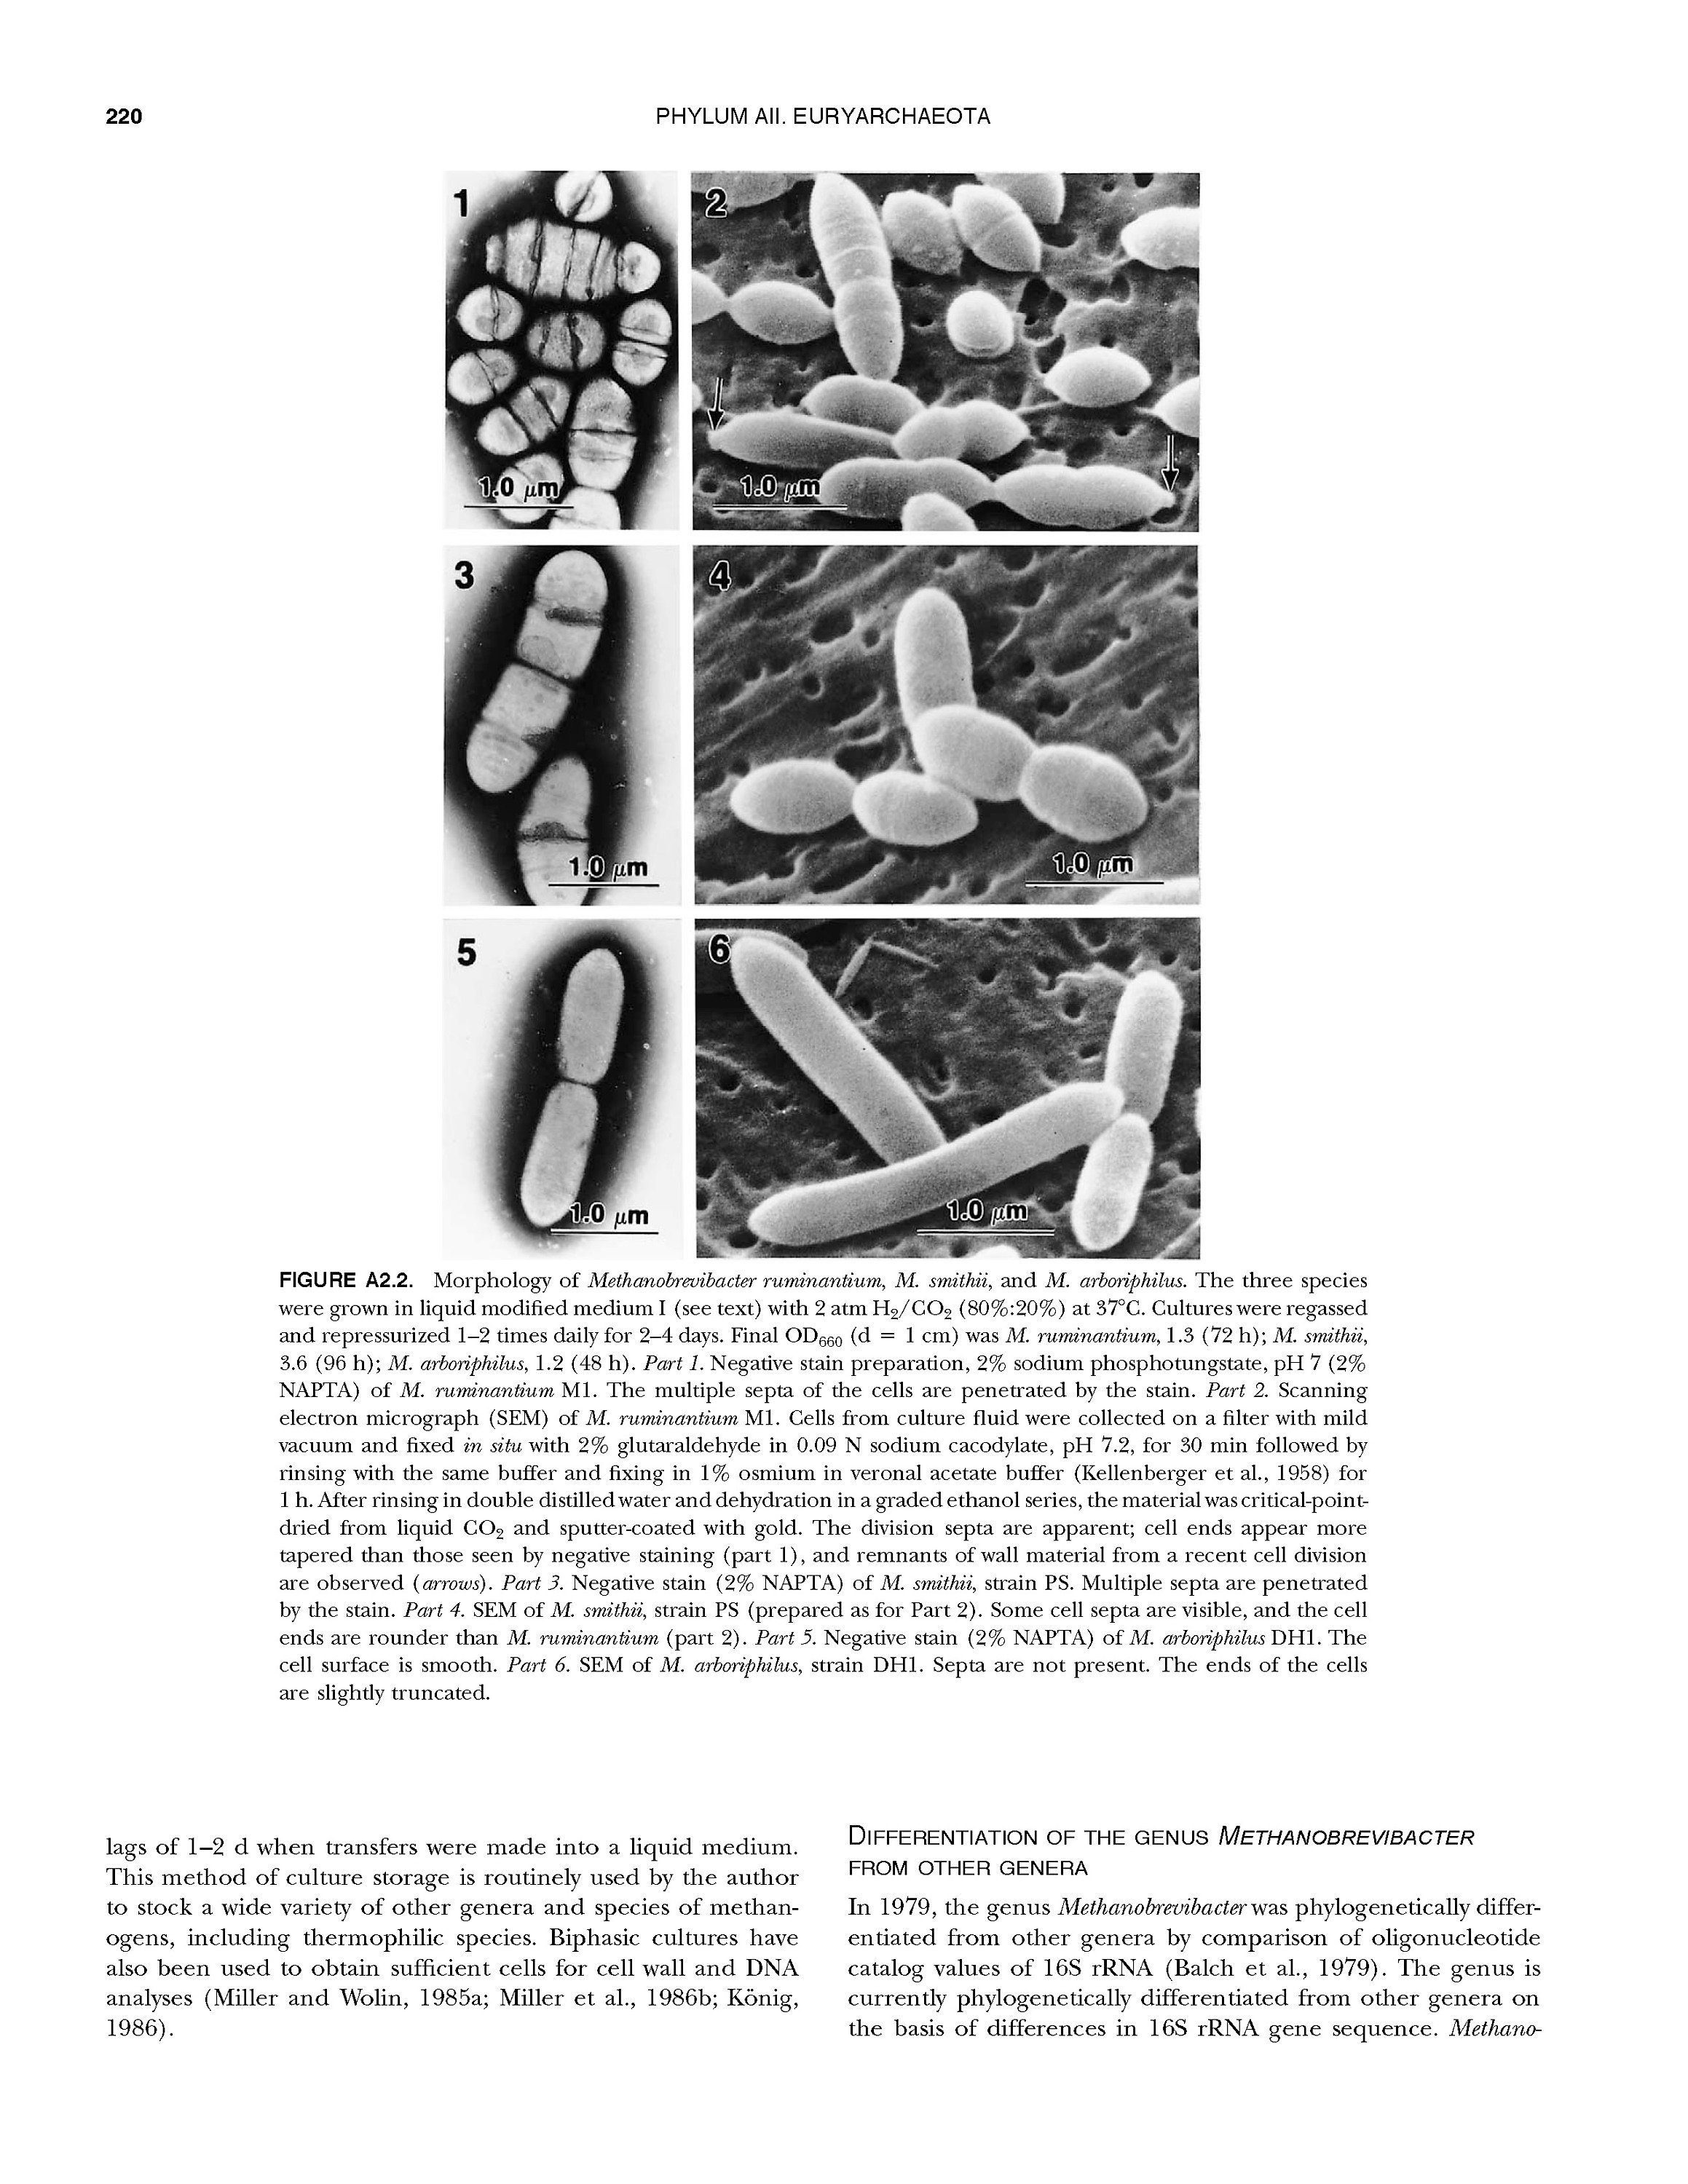 Bergey's Manual of Systematic Bacteriology: Vol.1 The Archaea and the